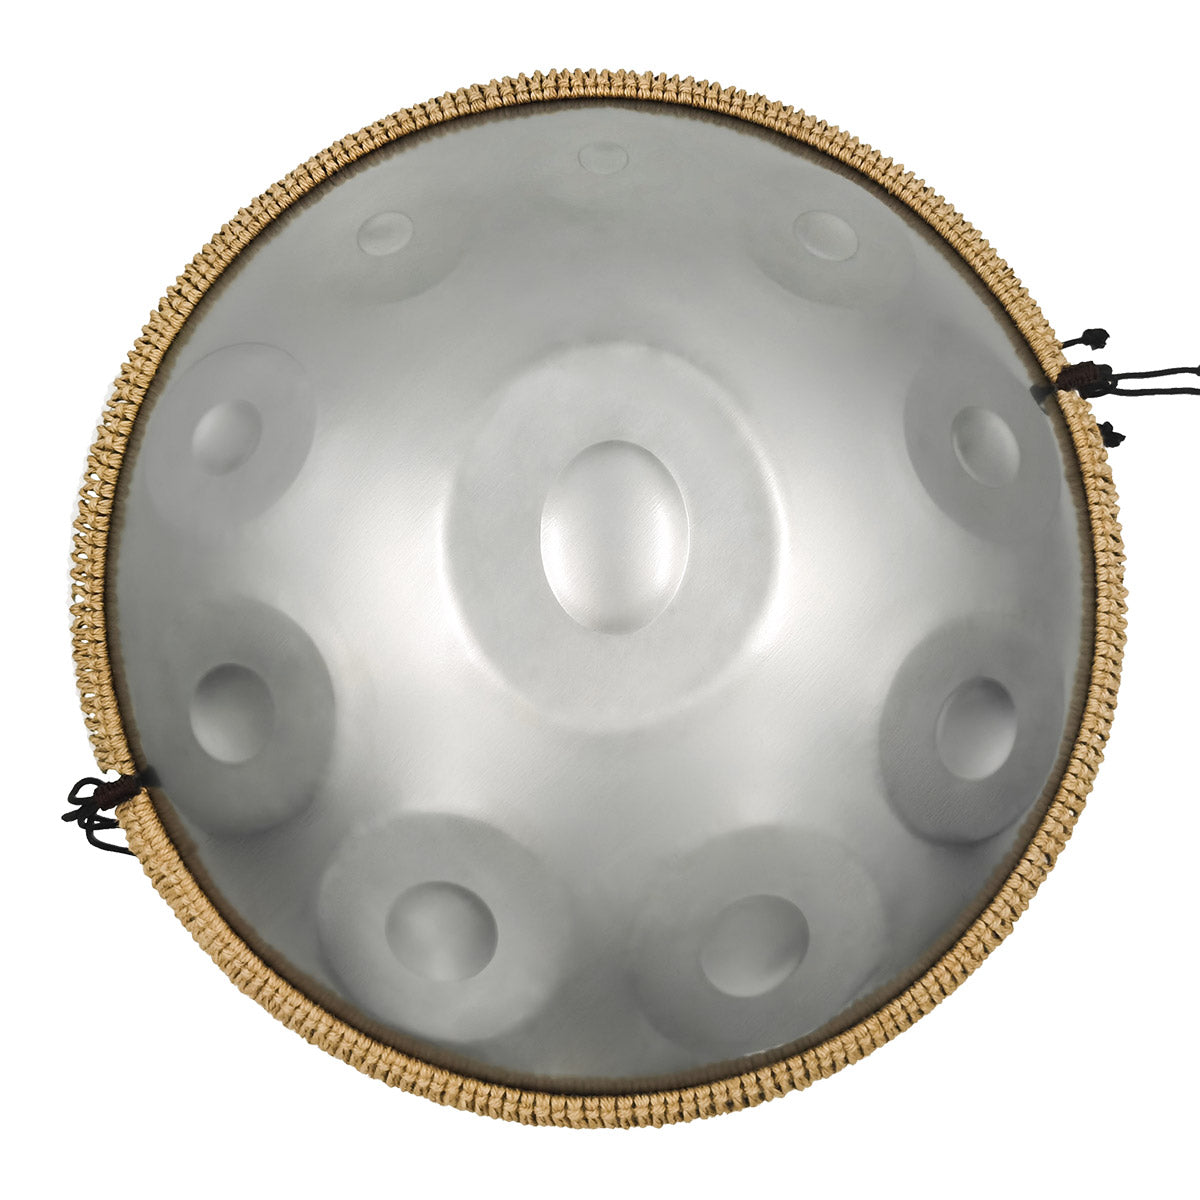 Lighteme STL Handpan Drum Sterling Silver 22 Inches 10 Notes D Minor Kurd Scale Hangdrum